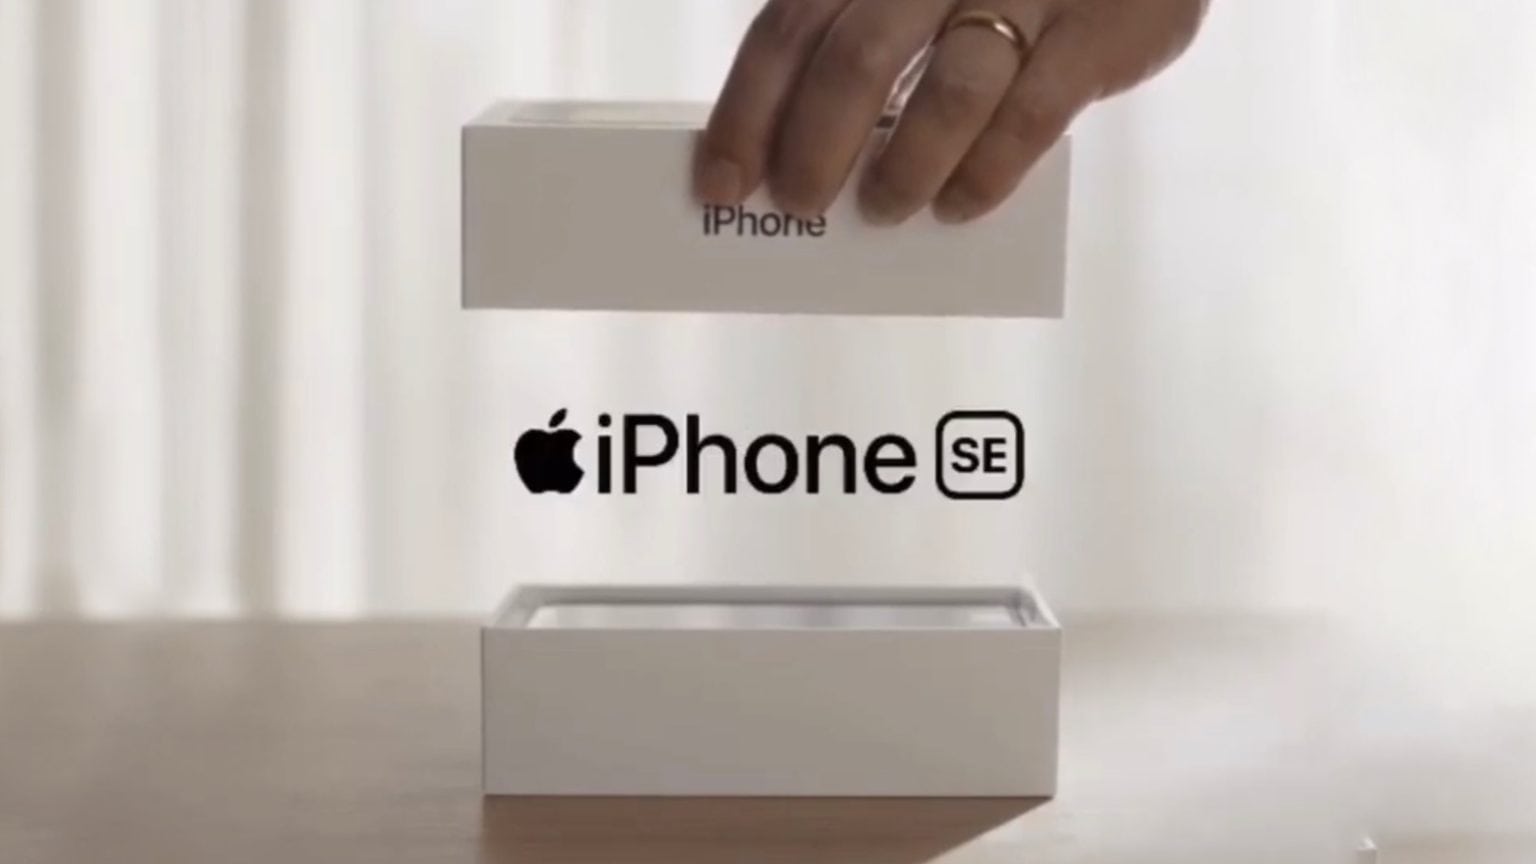 This short iPhone SE ad is supposedly intended for use online.